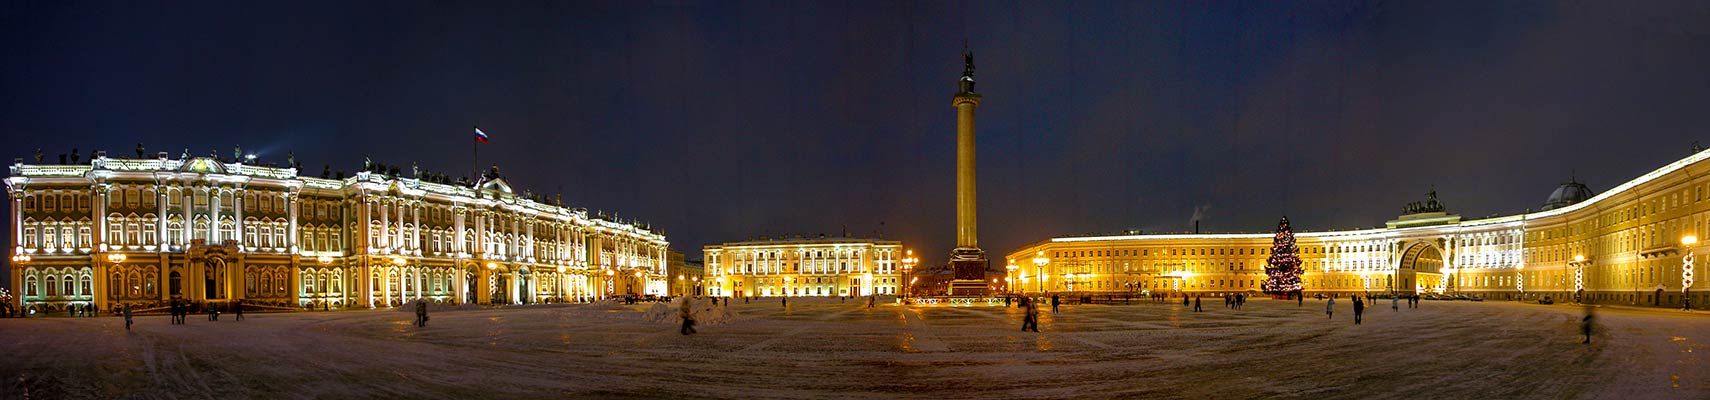 Palace Square with Winter Palace, Saint Petersburg